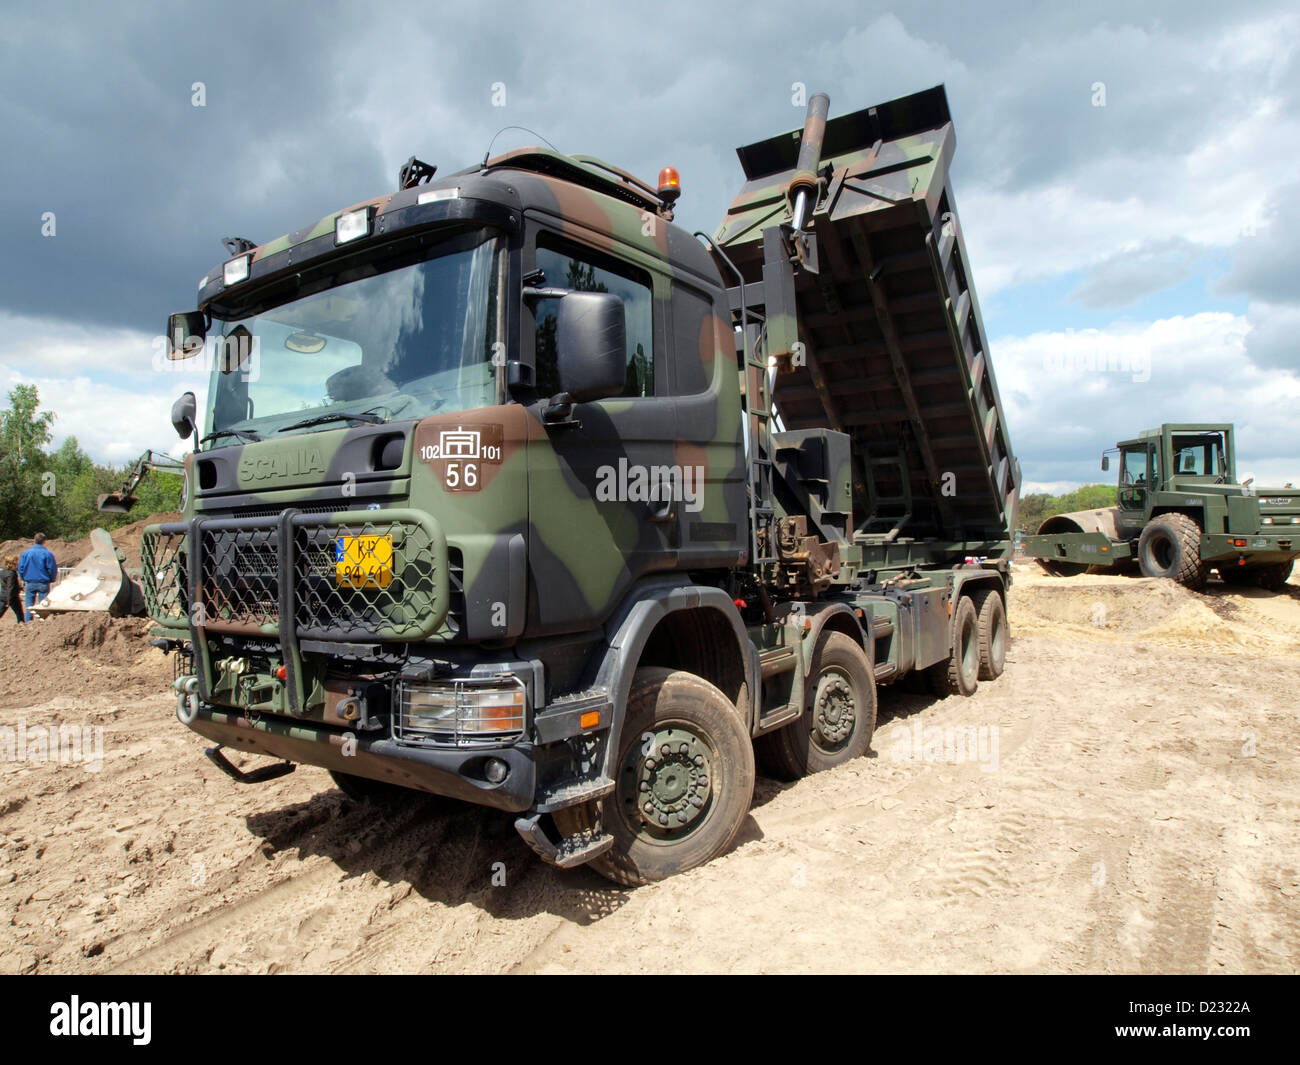 New scania hi-res stock photography and images - Alamy